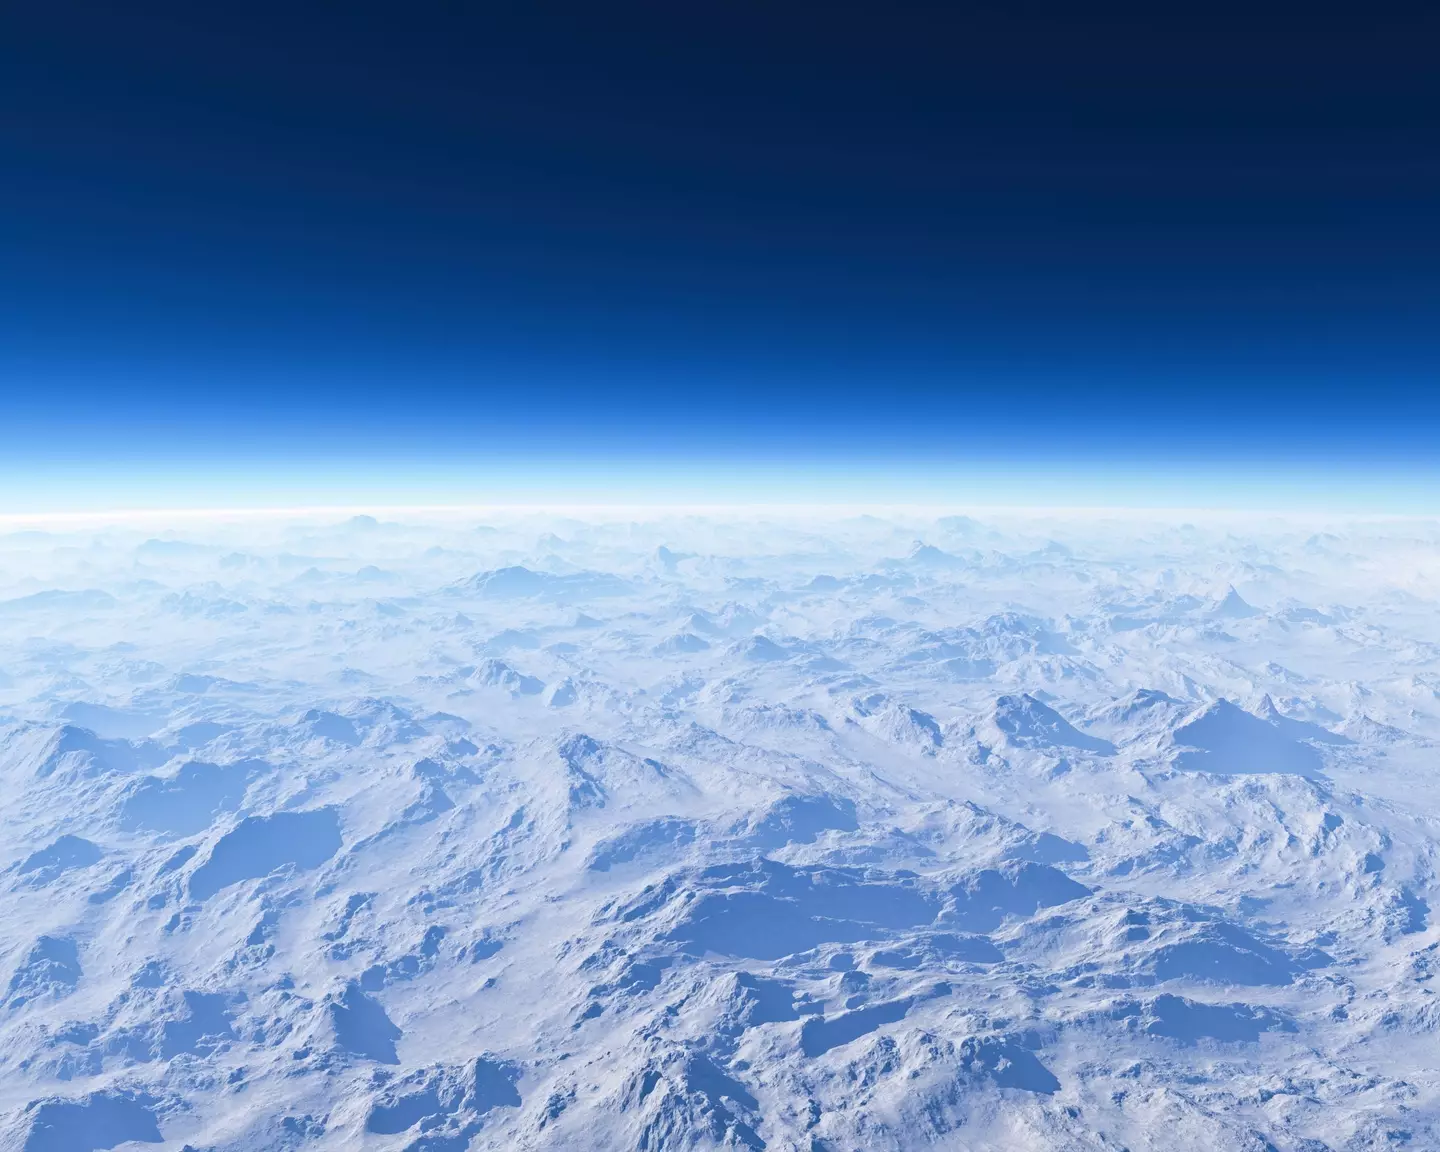 The ozone layer absorbs most of the Sun's ultraviolet radiation.